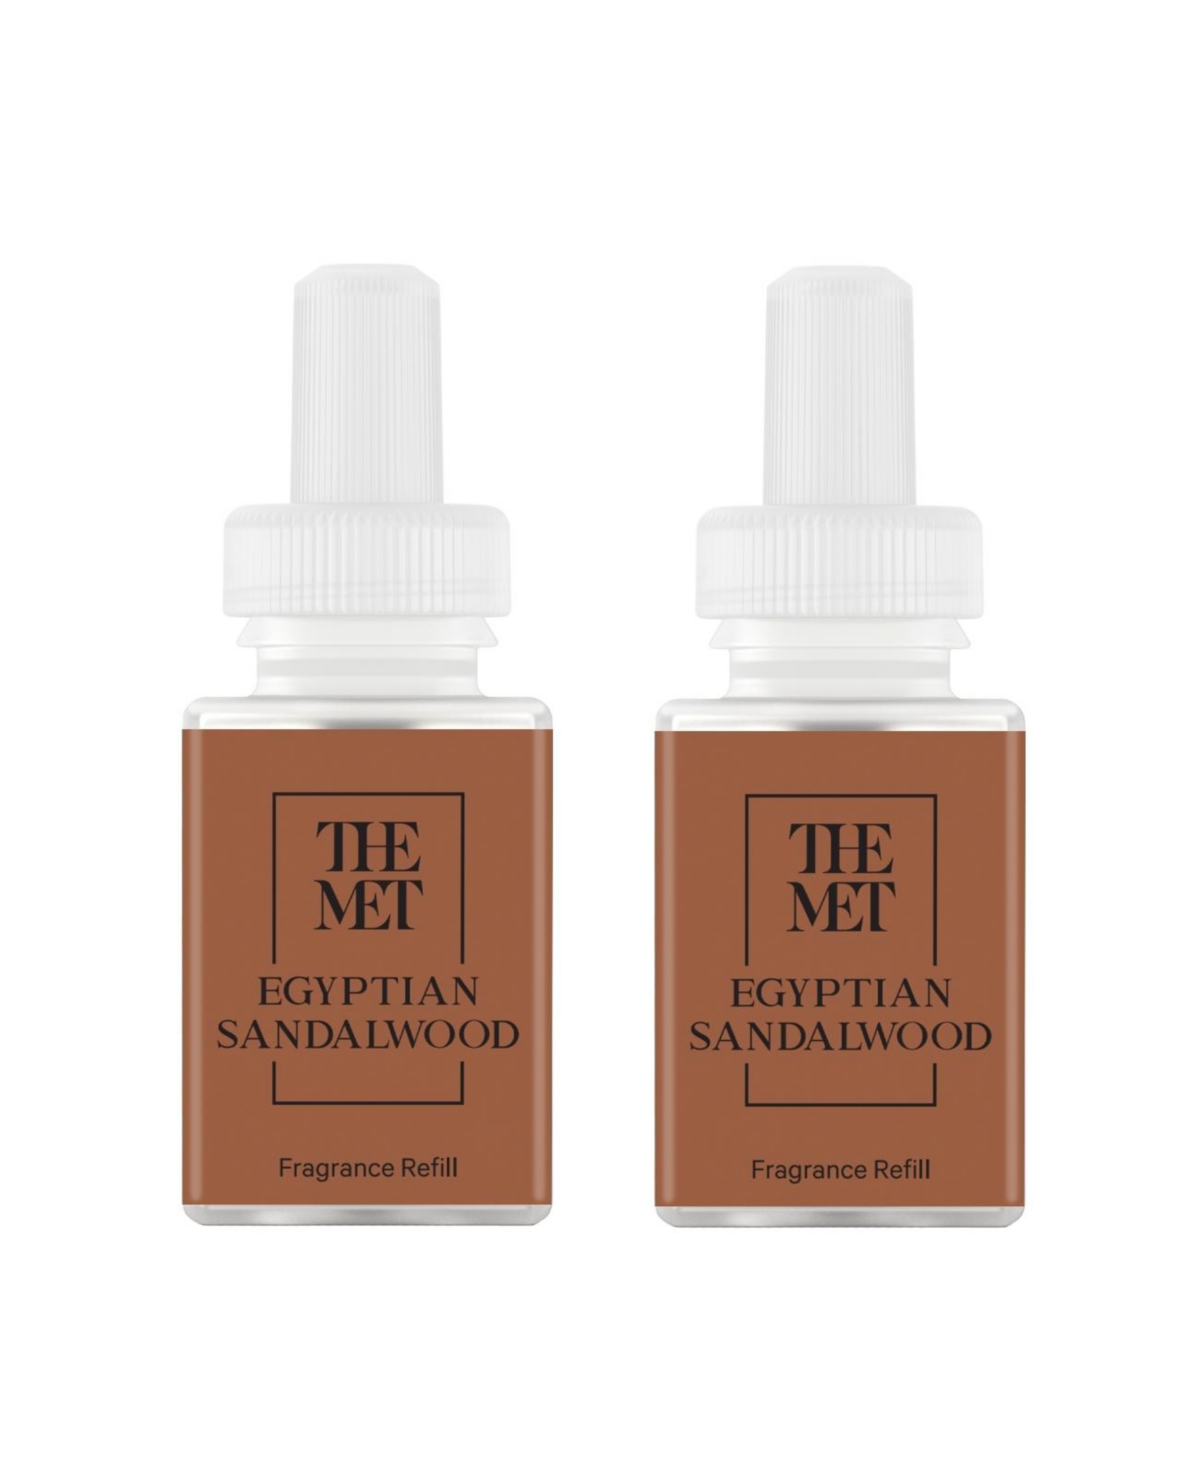 The Met - Egyptian Sandalwood - Home Scent Refill - Smart Home Air Diffuser Fragrance - Up to 120-Hours of Luxury Fragrance - Household Essential